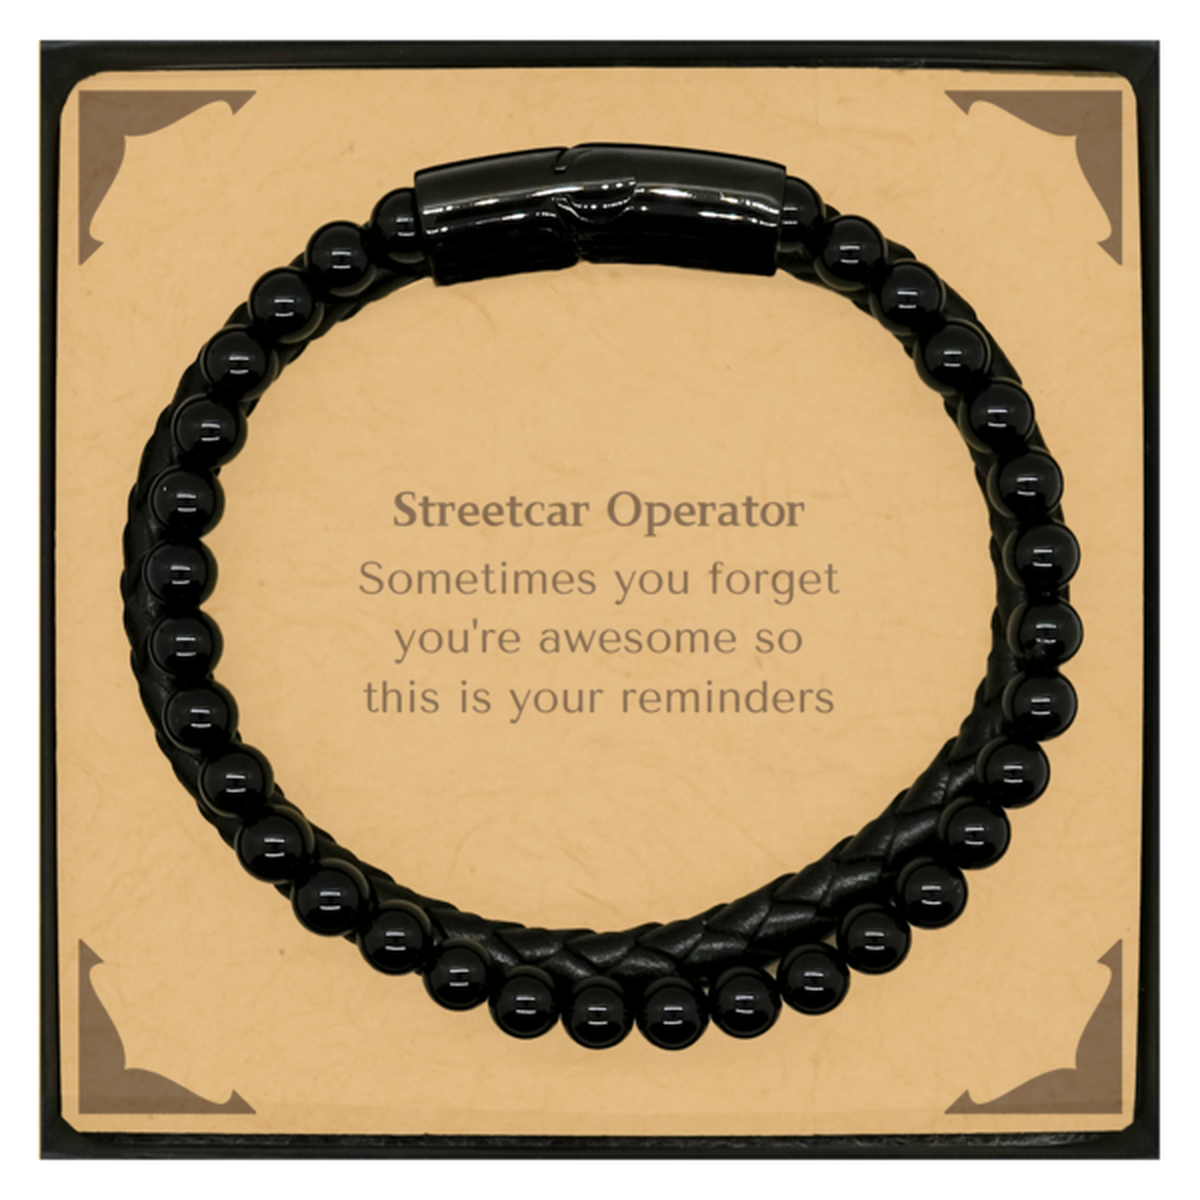 Sentimental Streetcar Operator Stone Leather Bracelets, Streetcar Operator Sometimes you forget you're awesome so this is your reminders, Graduation Christmas Birthday Gifts for Streetcar Operator, Men, Women, Coworkers